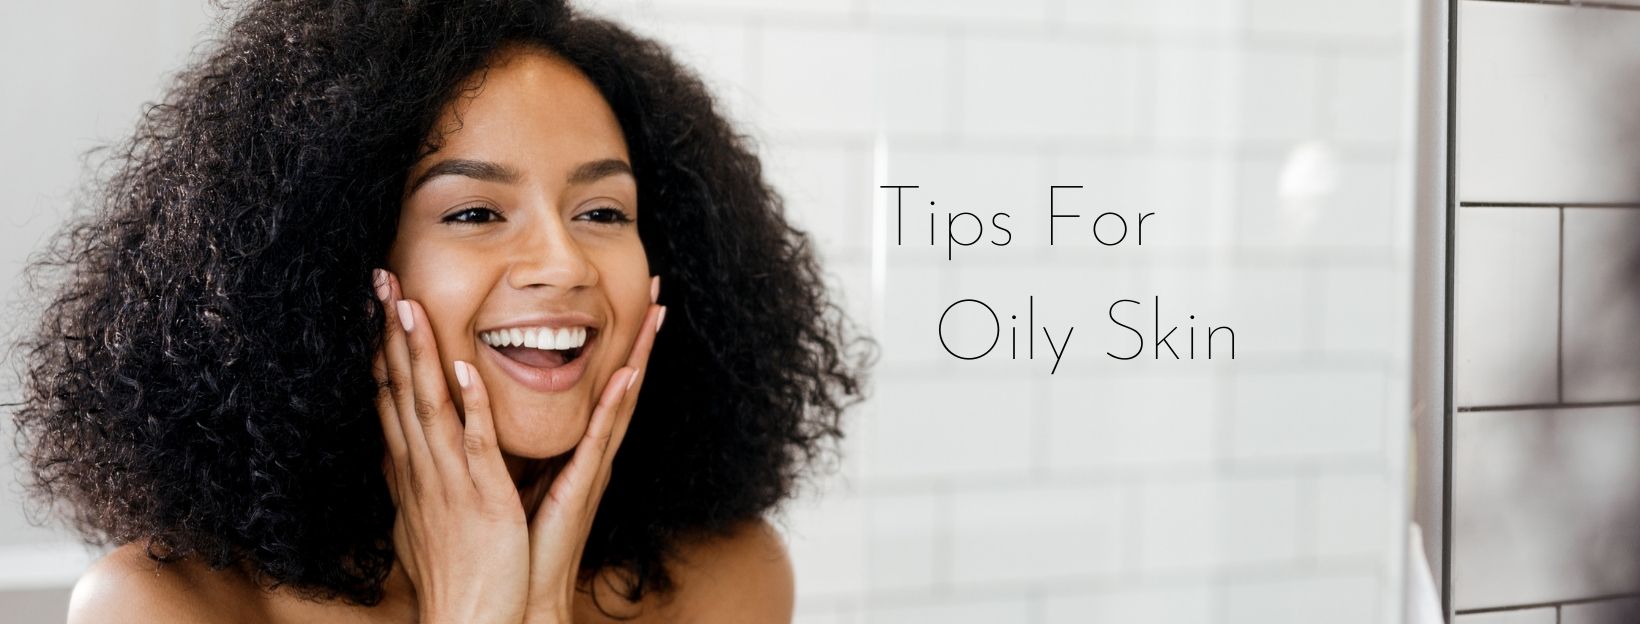 10 Expert Tips To Keeping Oily Skin Clean + Clear